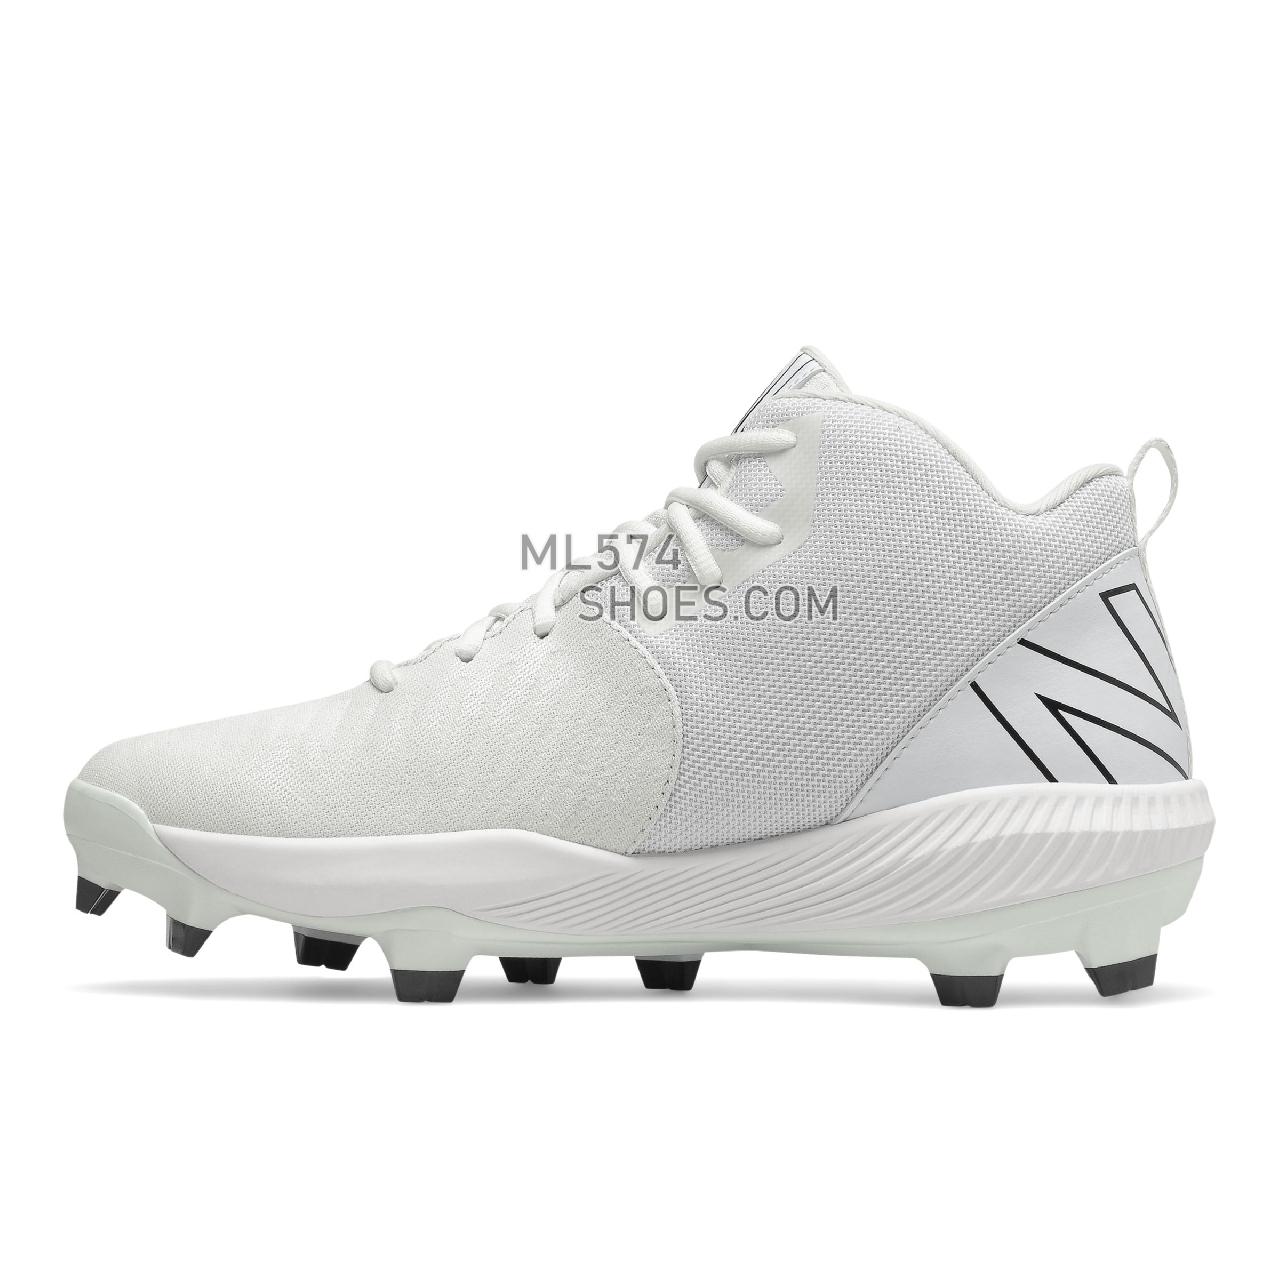 New Balance FuelCell 4040 v6 Mid-Molded - Men's Mid-Cut Baseball Cleats - White with Black - PM4040W6